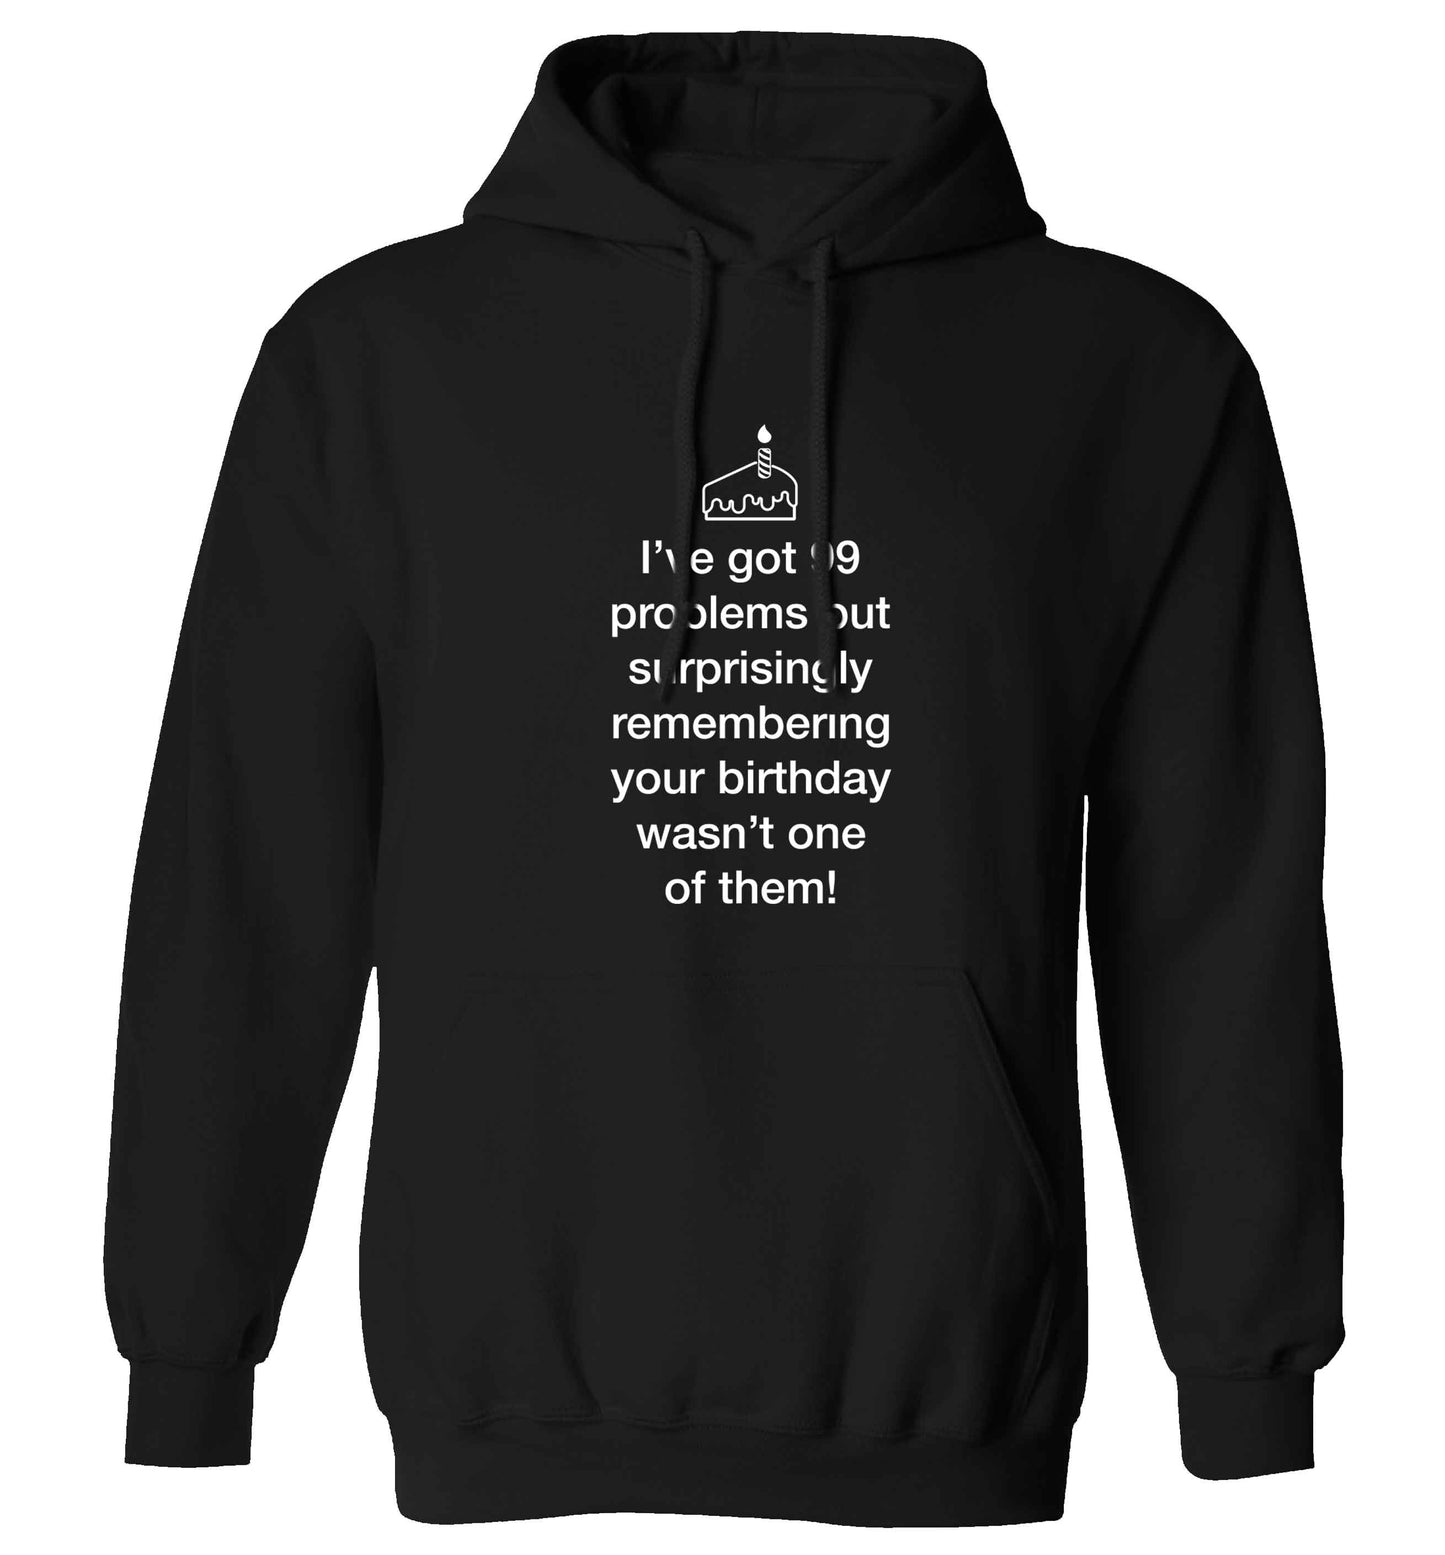 I've got 99 problems but surprisingly remembering your birthday wasn't one of them! adults unisex black hoodie 2XL